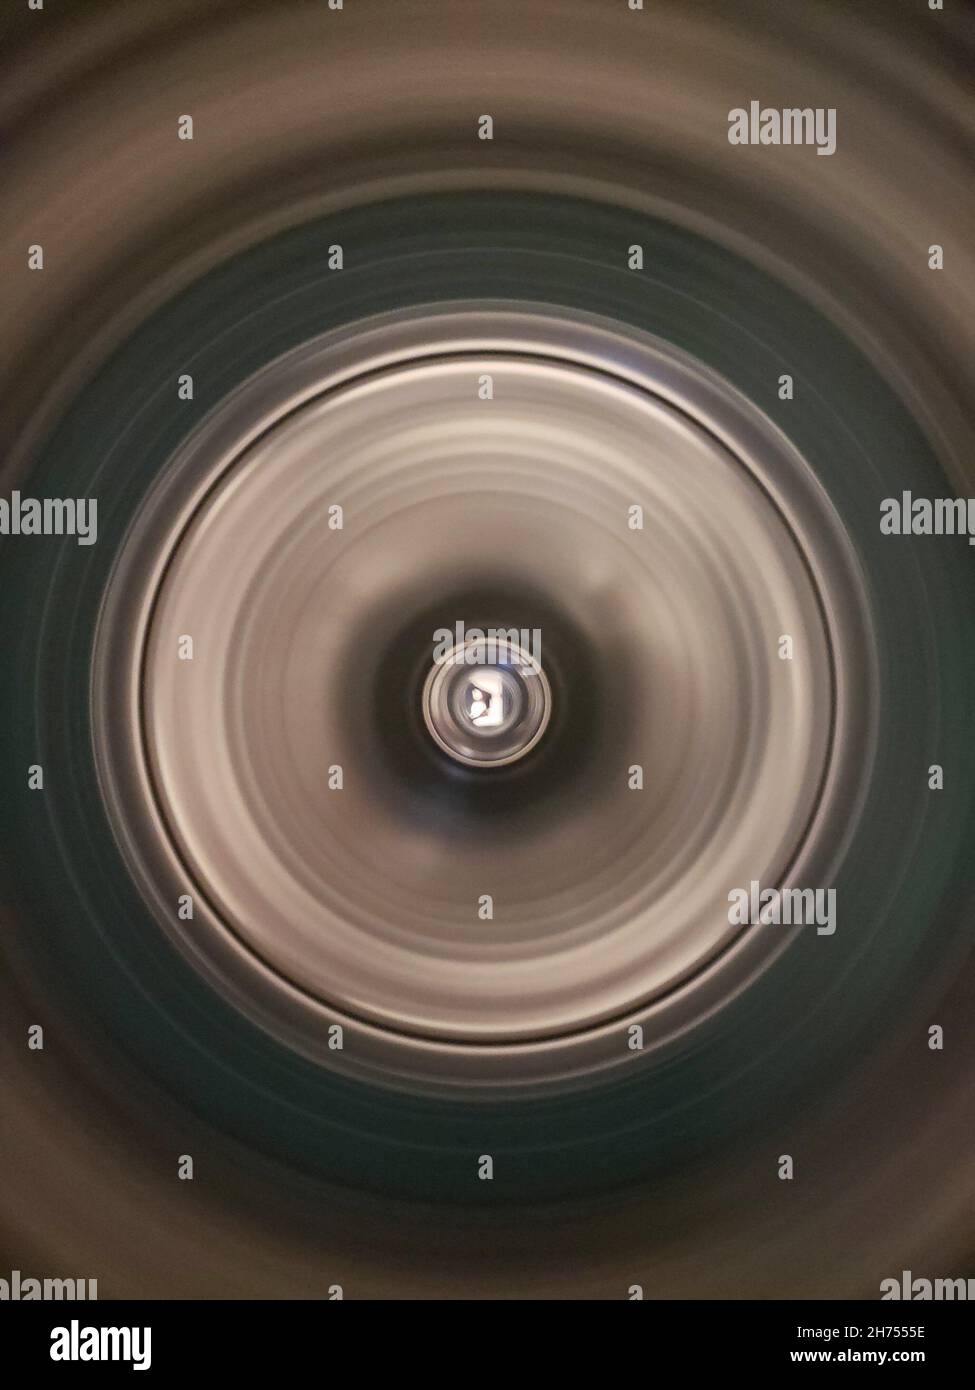 Looking into the Tub of a Washing Machine on Spin Cycle Stock Photo